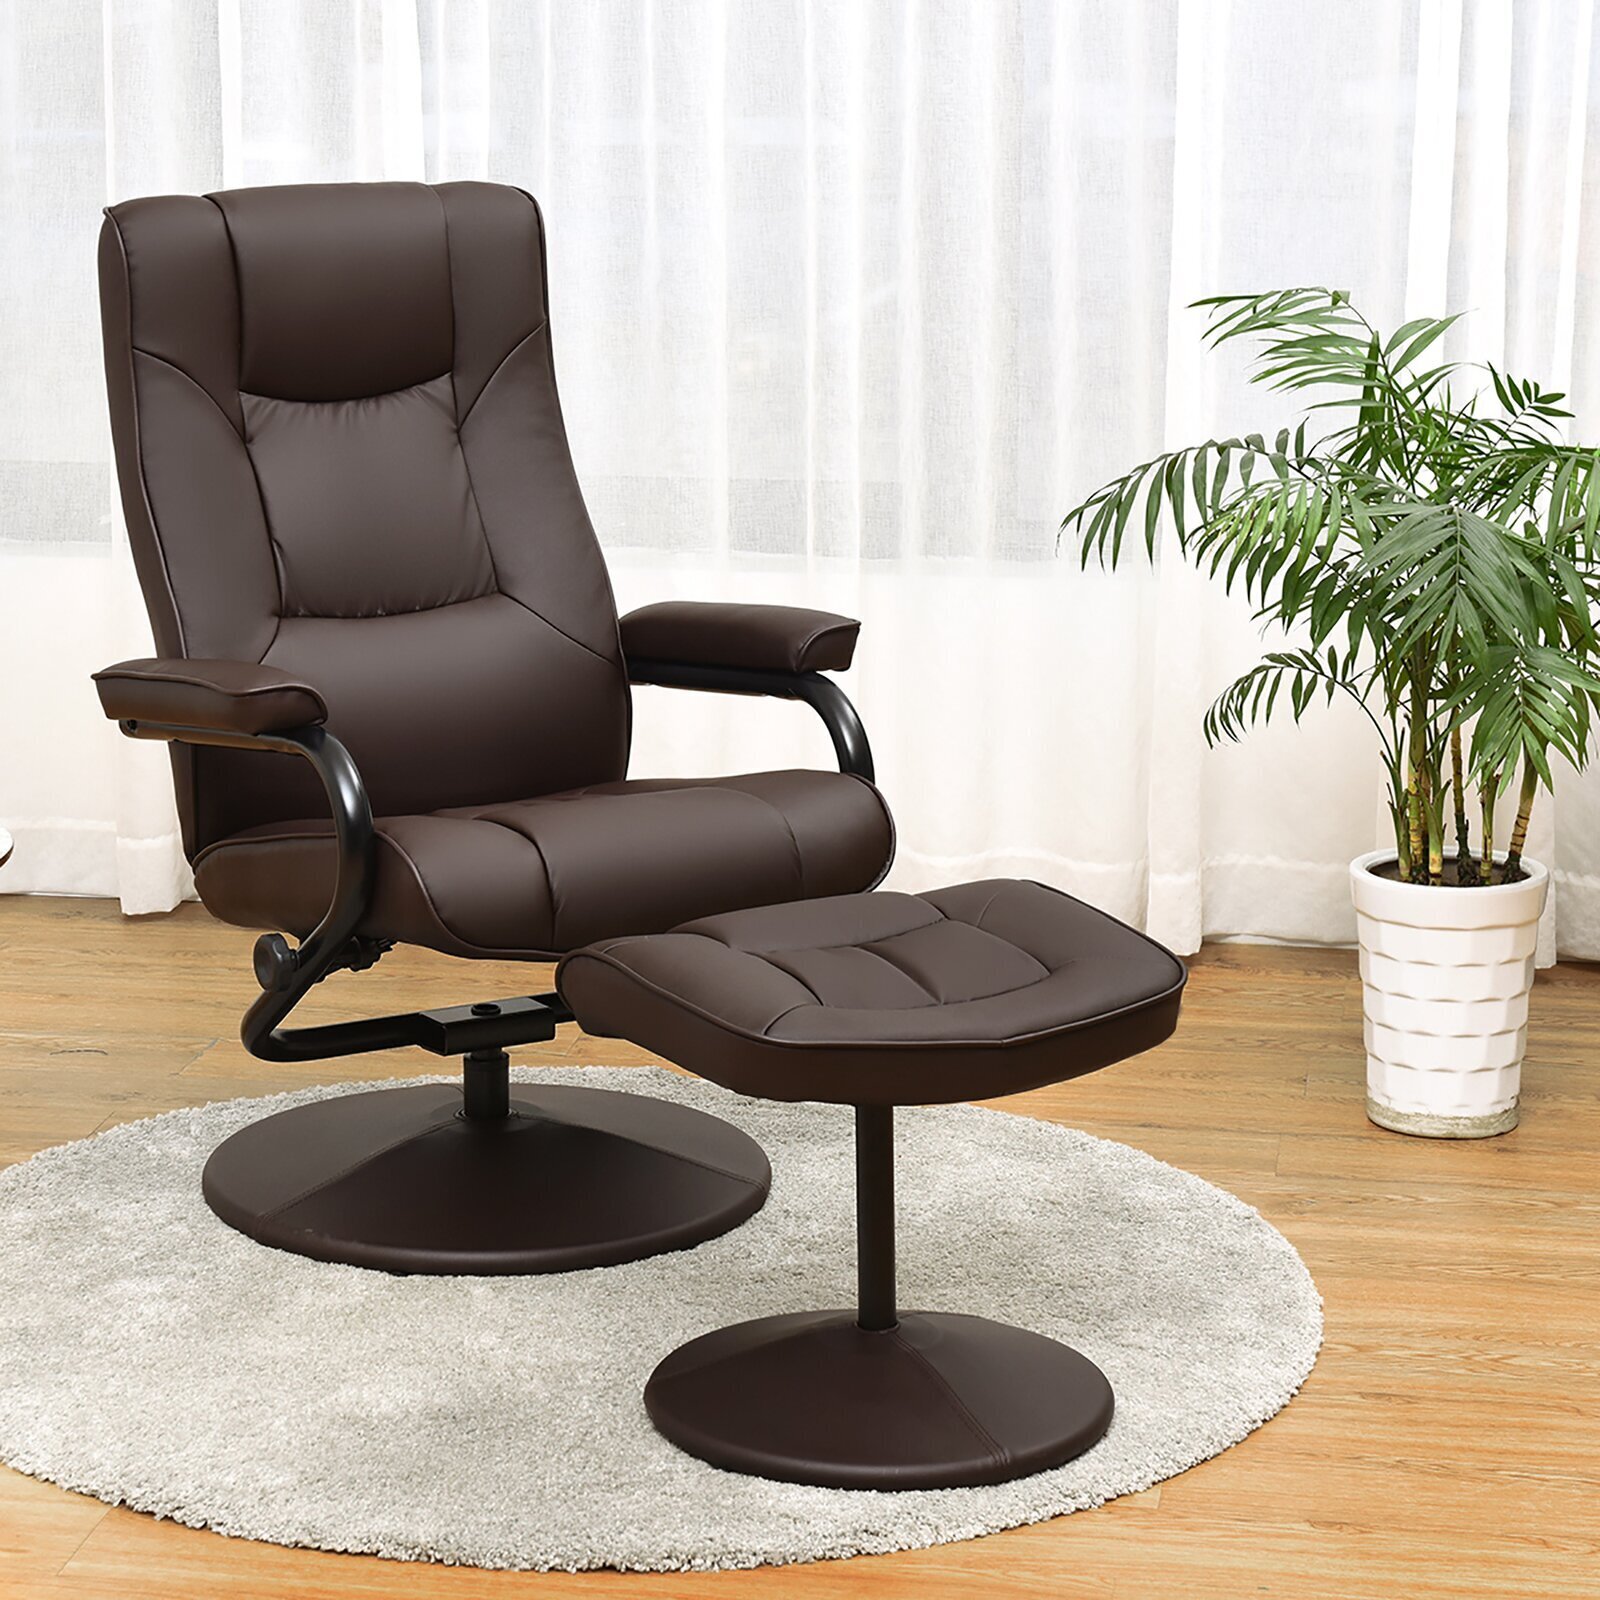 Affordable Ergonomic Leather Recliner for A Touch of Luxury 